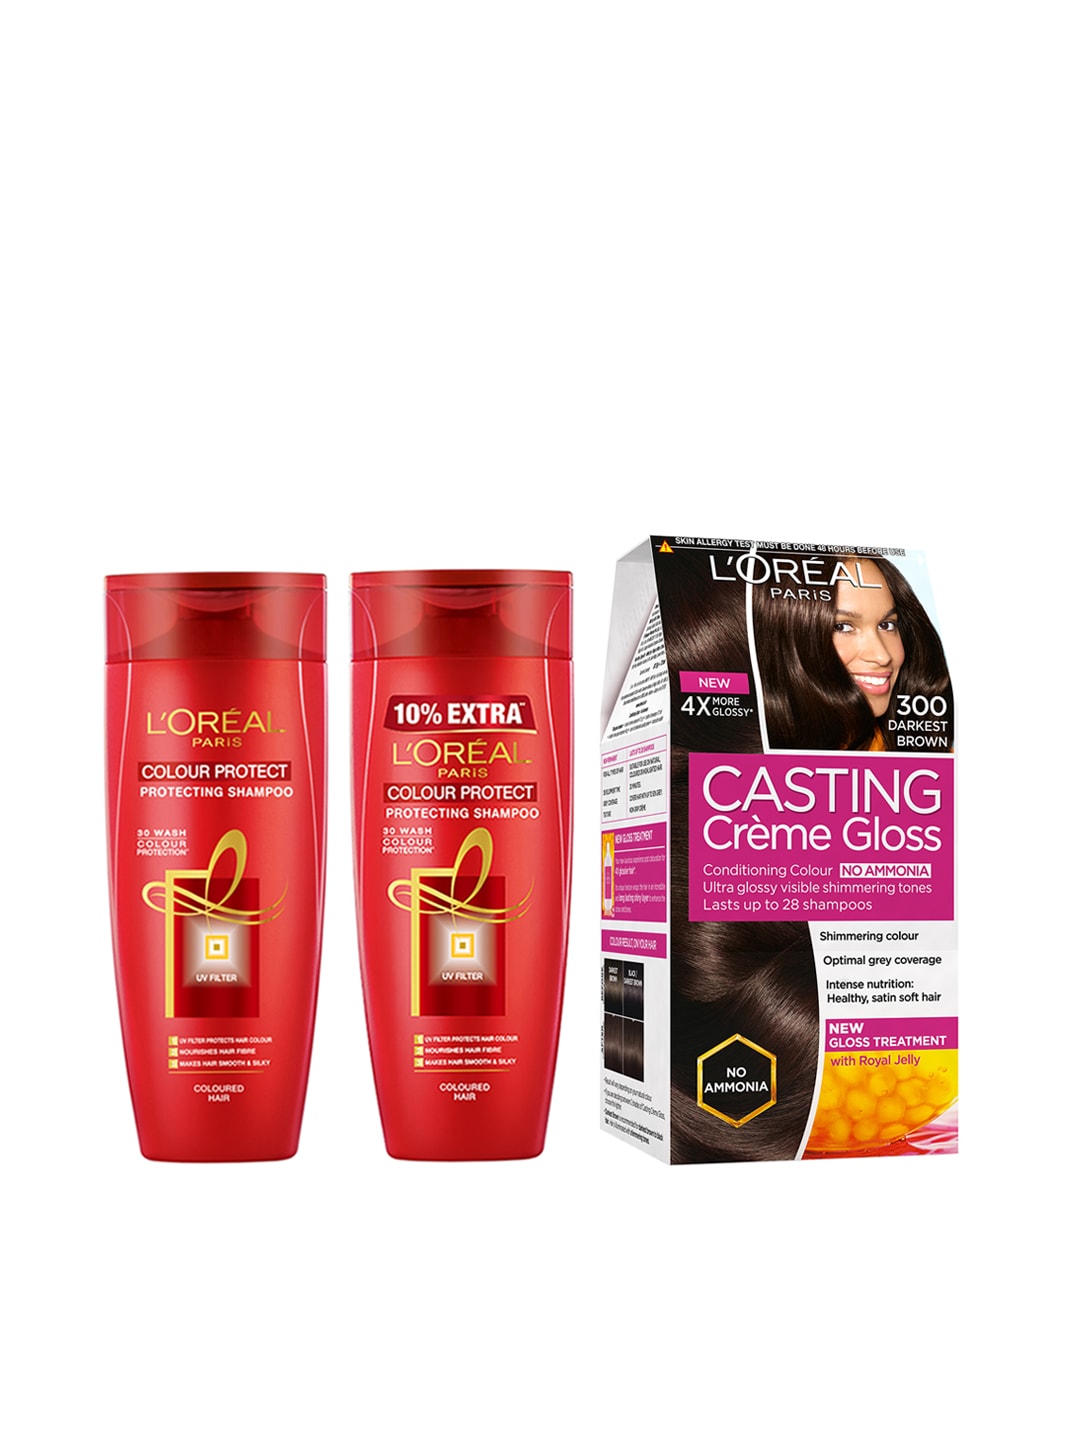 L'Oreal Paris Set of 2 Colour Protecting Shampoo & Casting Creme Gloss Hair colour Price in India